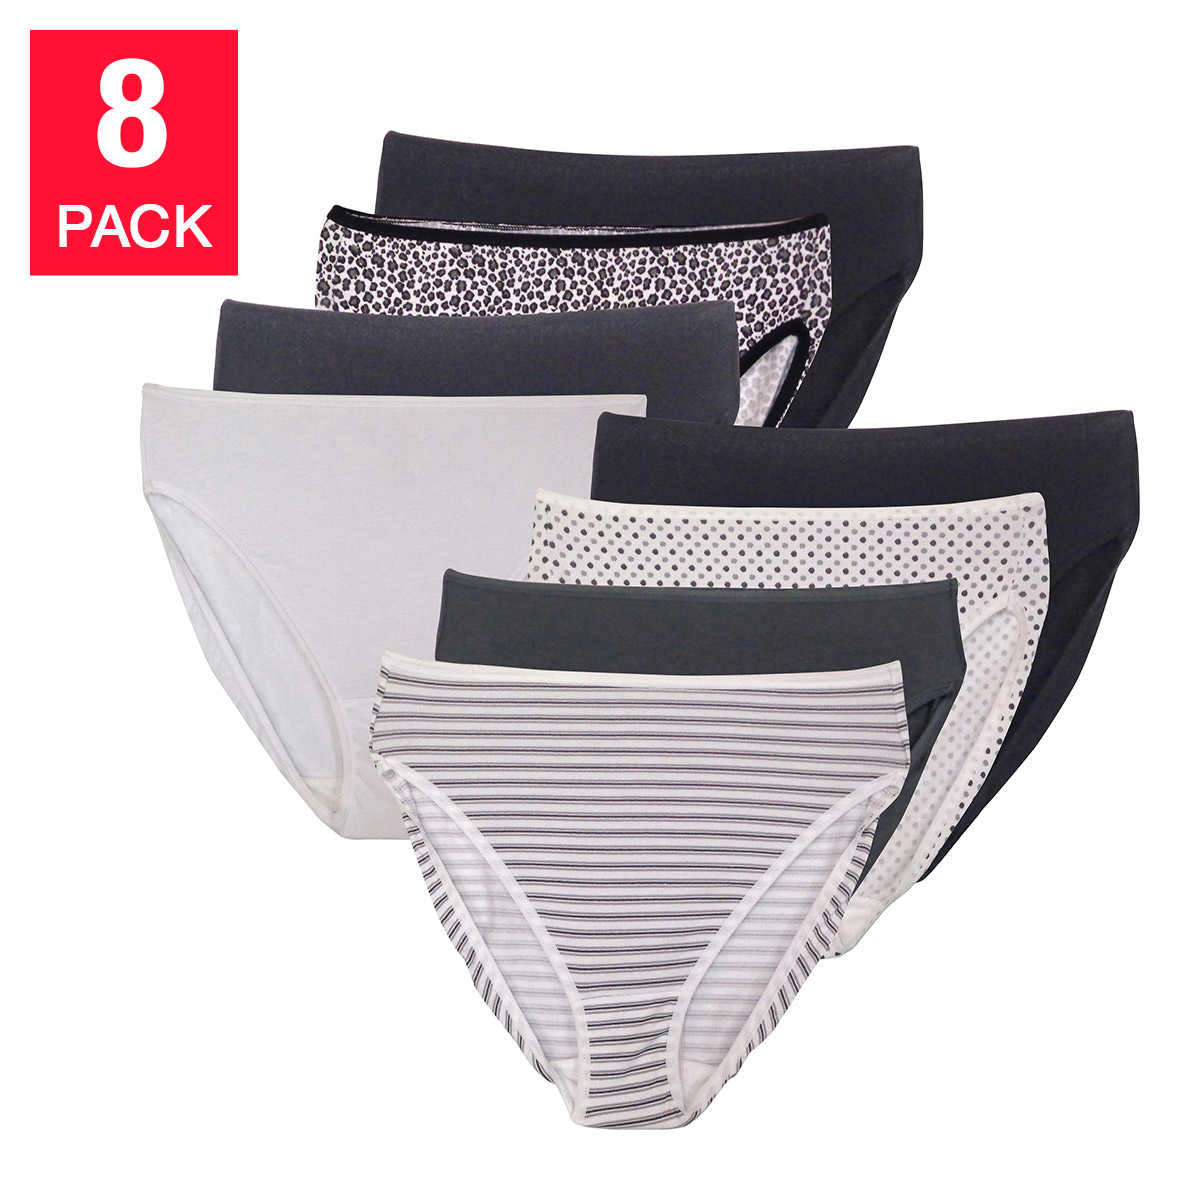 Felina Cotton Stretch Hi Cut Panty (6-Pack) Full Coverage Underwear for  Women - Sexy Lingerie Panties for Women, Style: C1818 (Gray Marine, Small)  